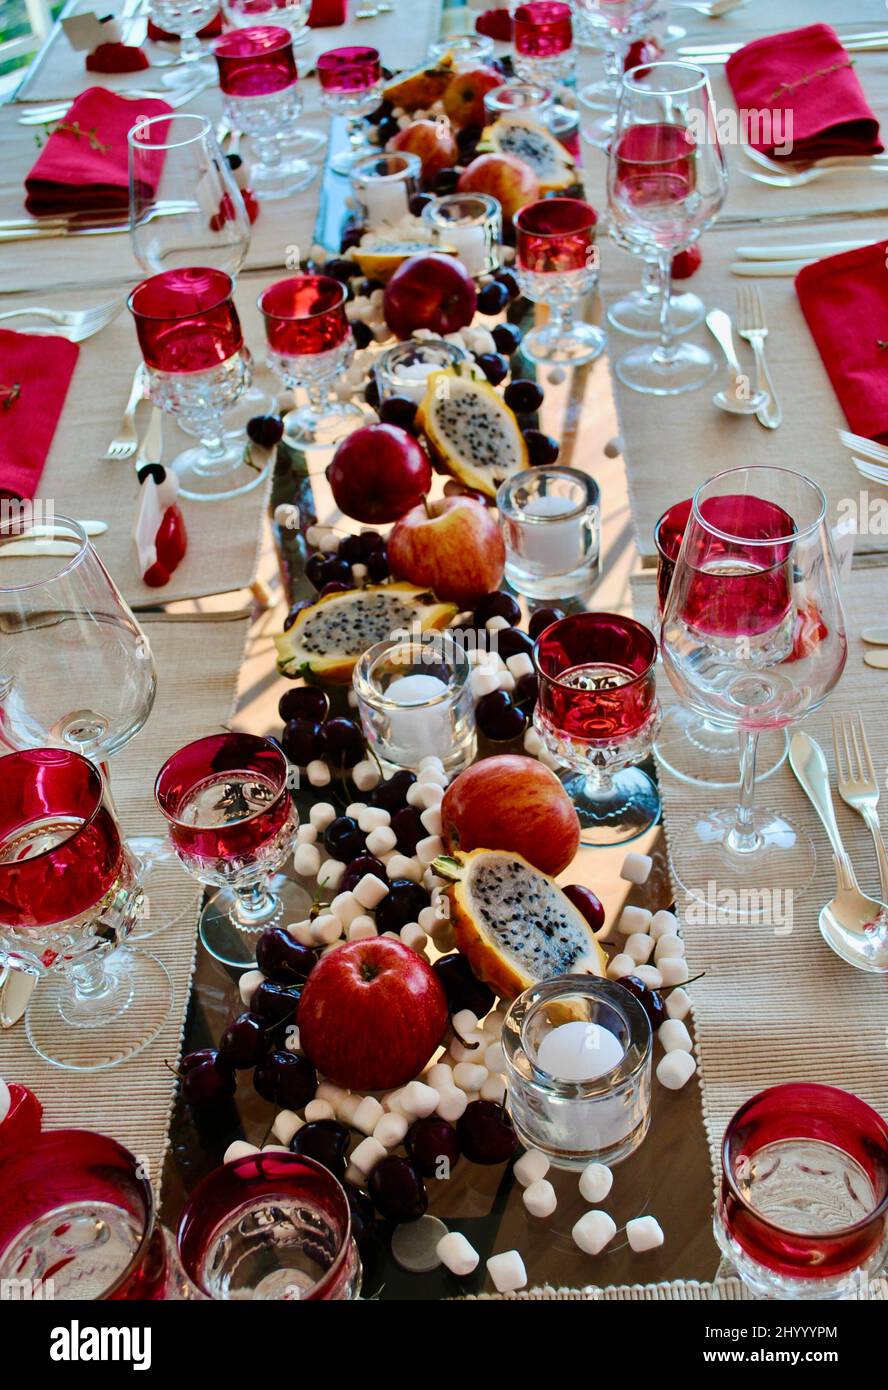 Dinner table setting decorated with apples, dragon fruit, marshmallows and Finnish Marimekko Kivi votive candle holders waiting for dinner guests. Stock Photo